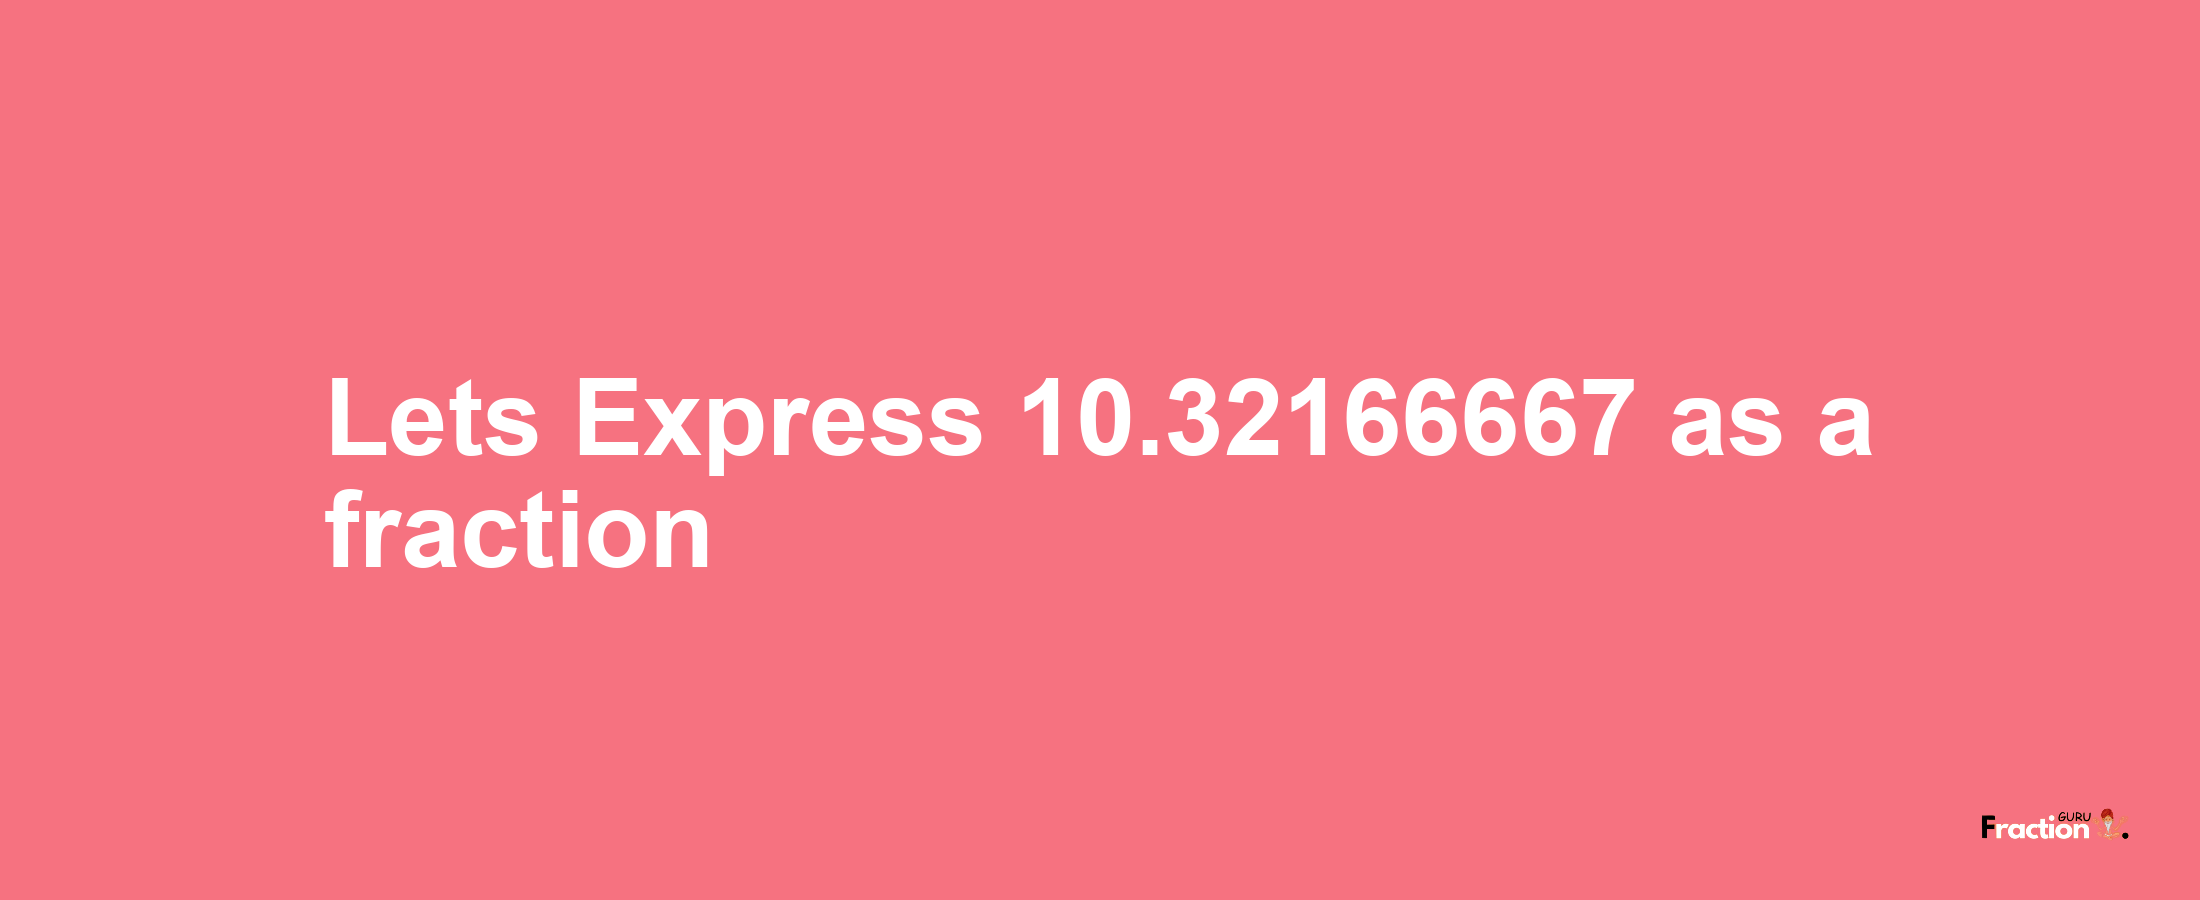 Lets Express 10.32166667 as afraction